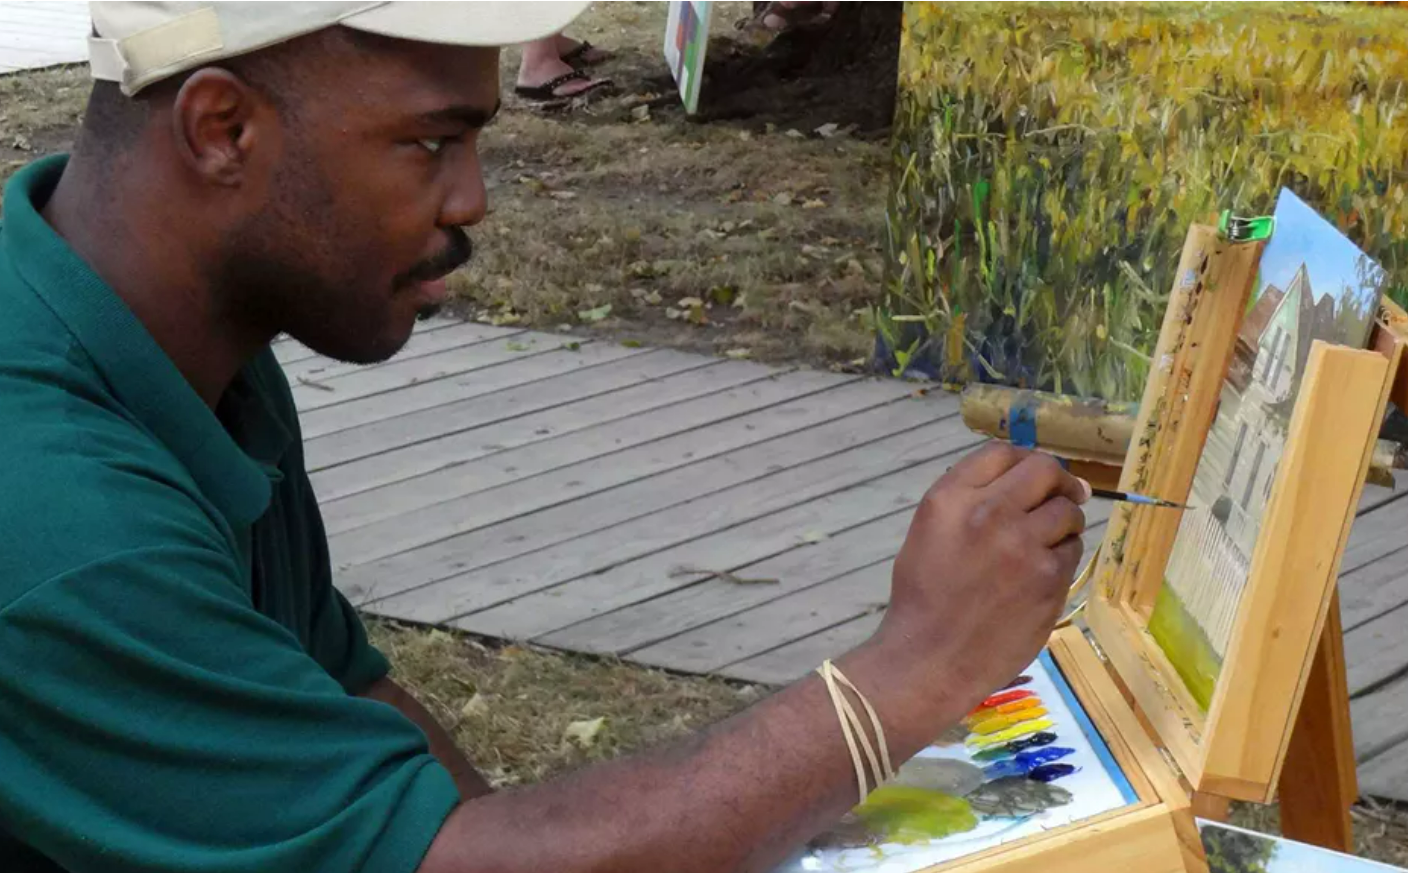 A black man in ball cap, painting.